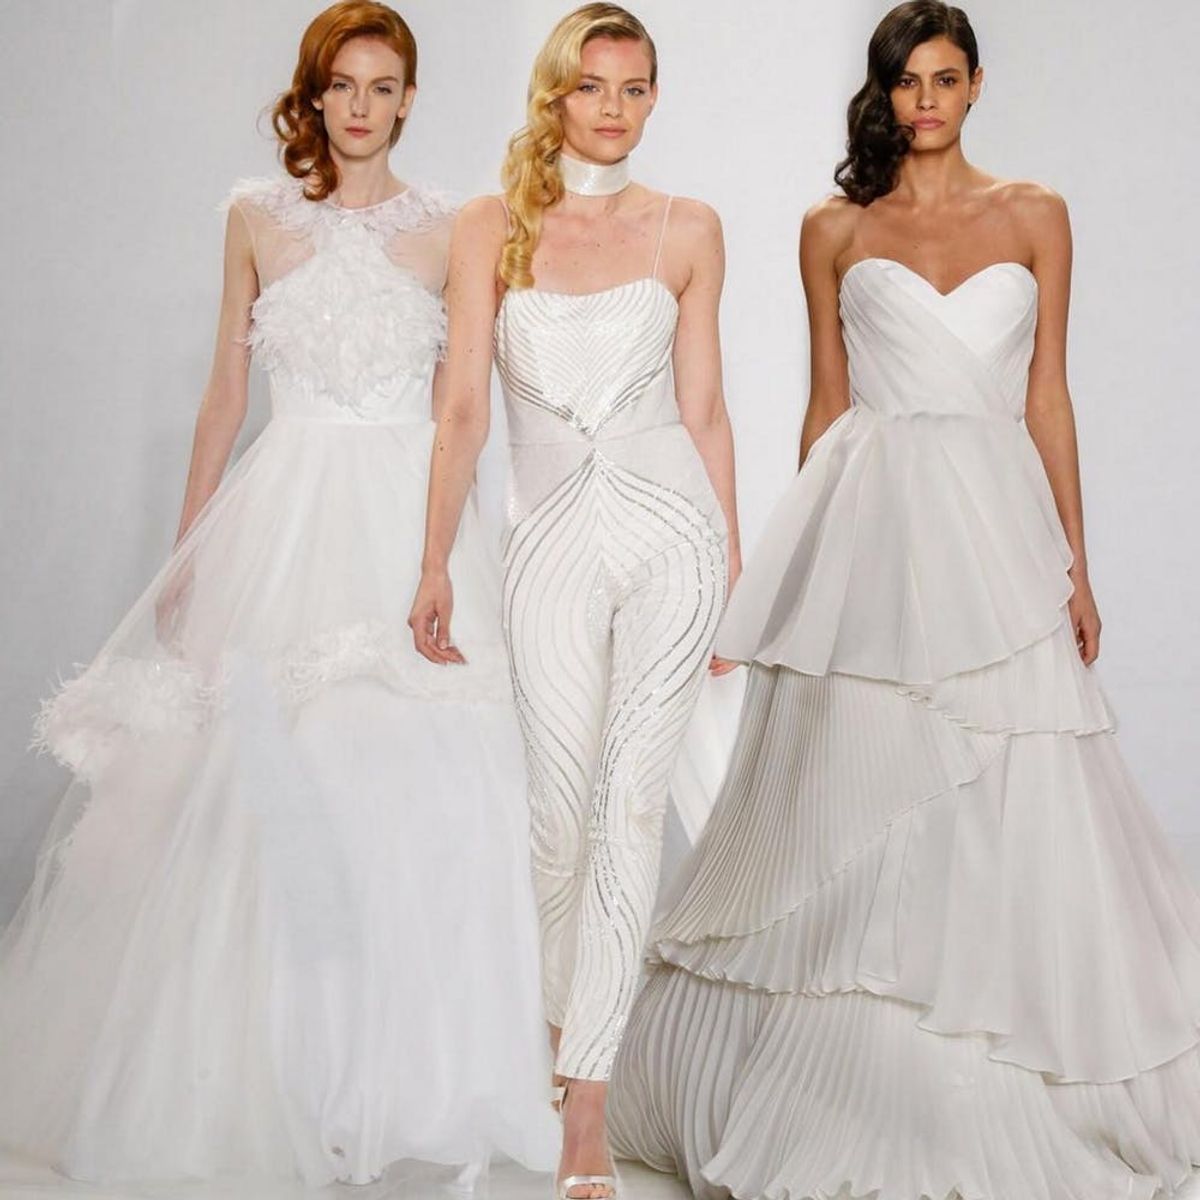 Your Favorite Project Runway Designer Just Dropped a Bridal Line